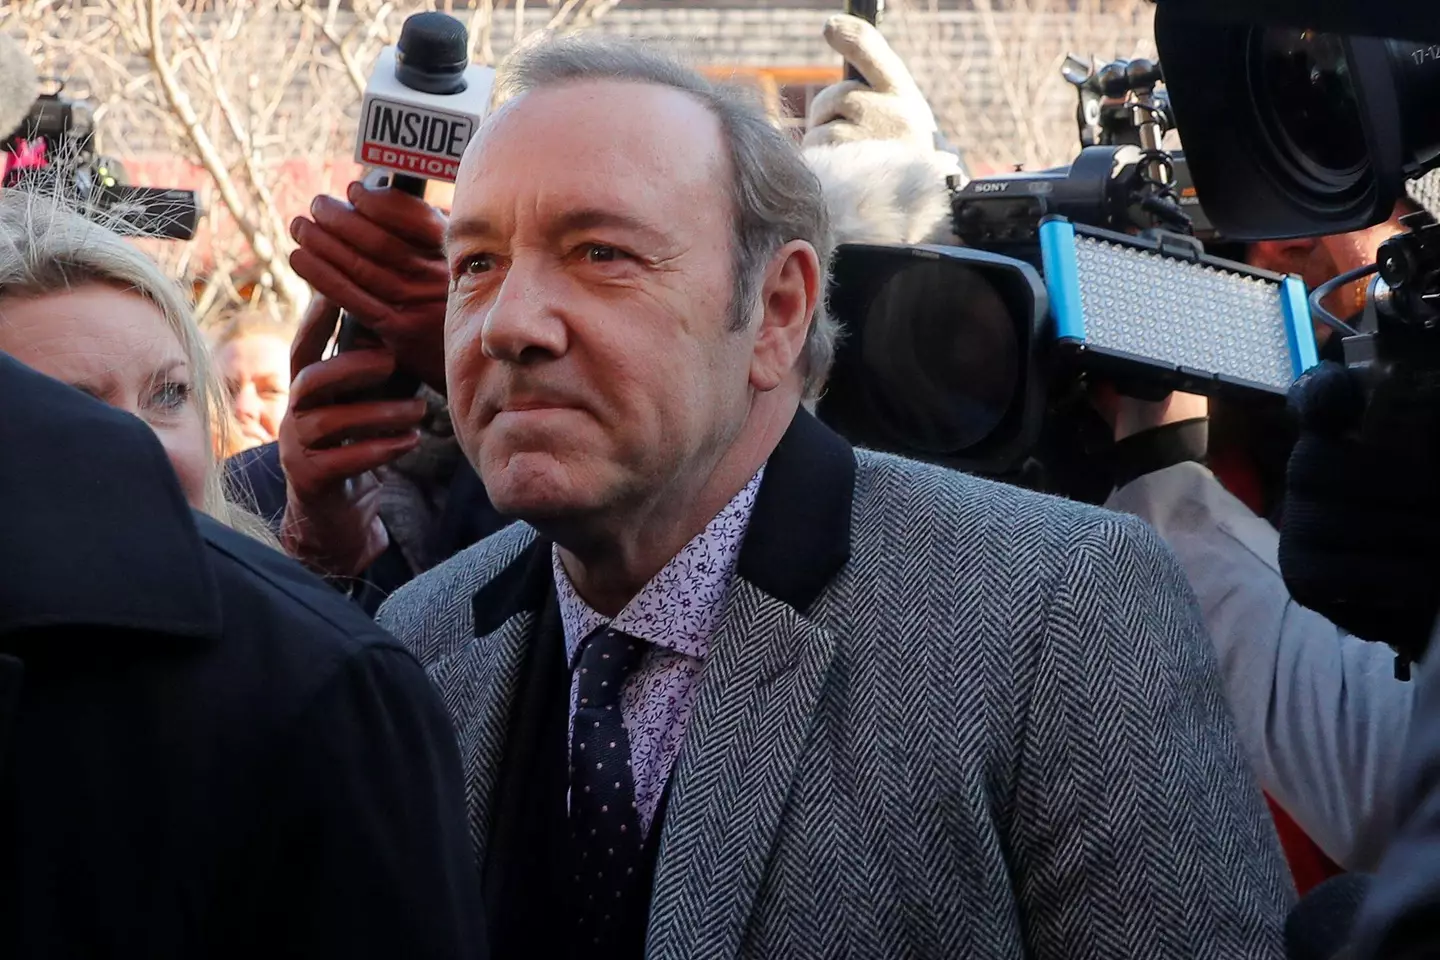 Kevin Spacey was accused of misconduct by more than 20 men.